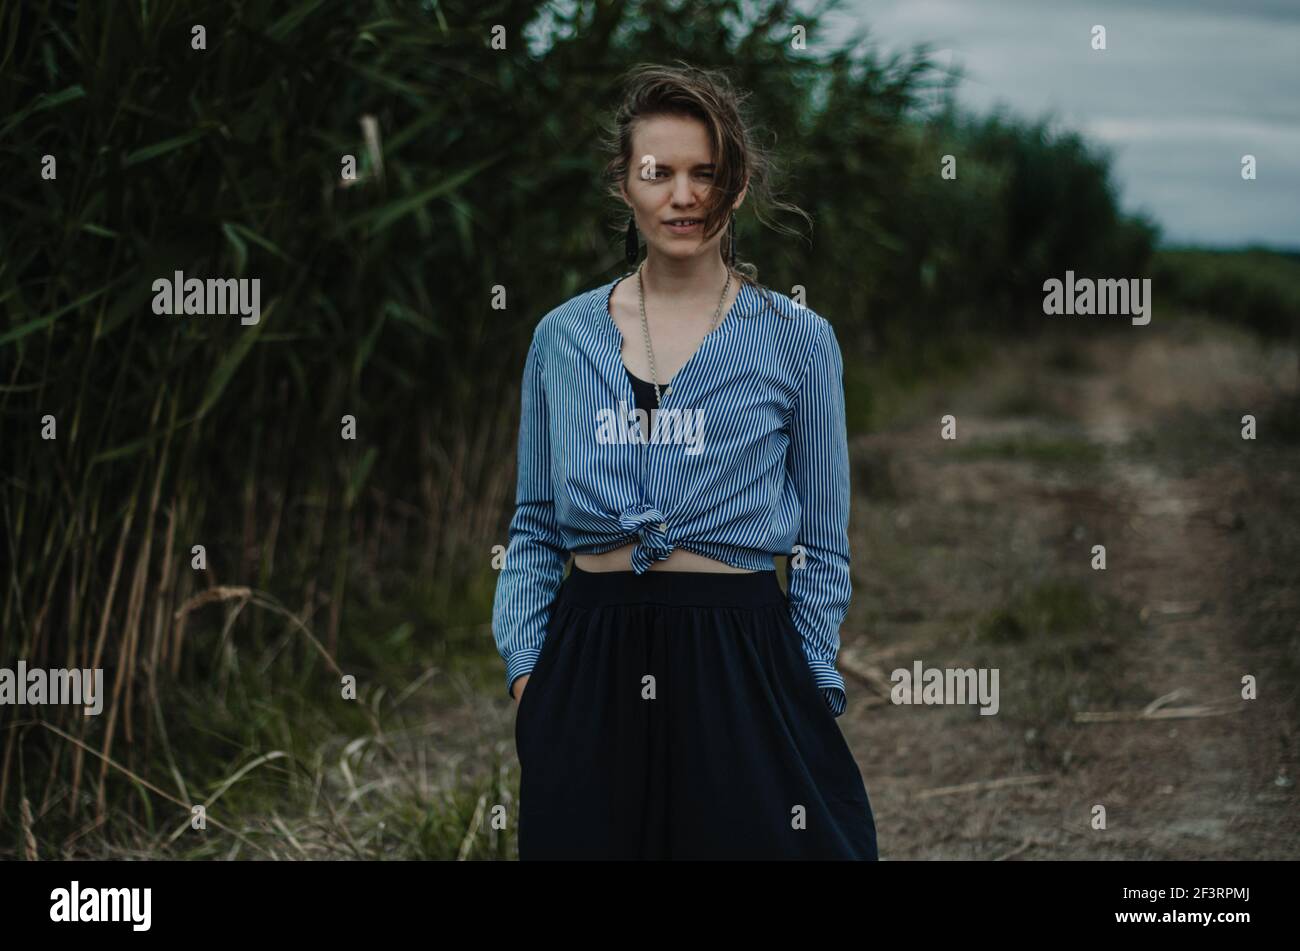 Portrait of a young caucasian woman with neutral expression, near reeds on a path, moody vibe Stock Photo